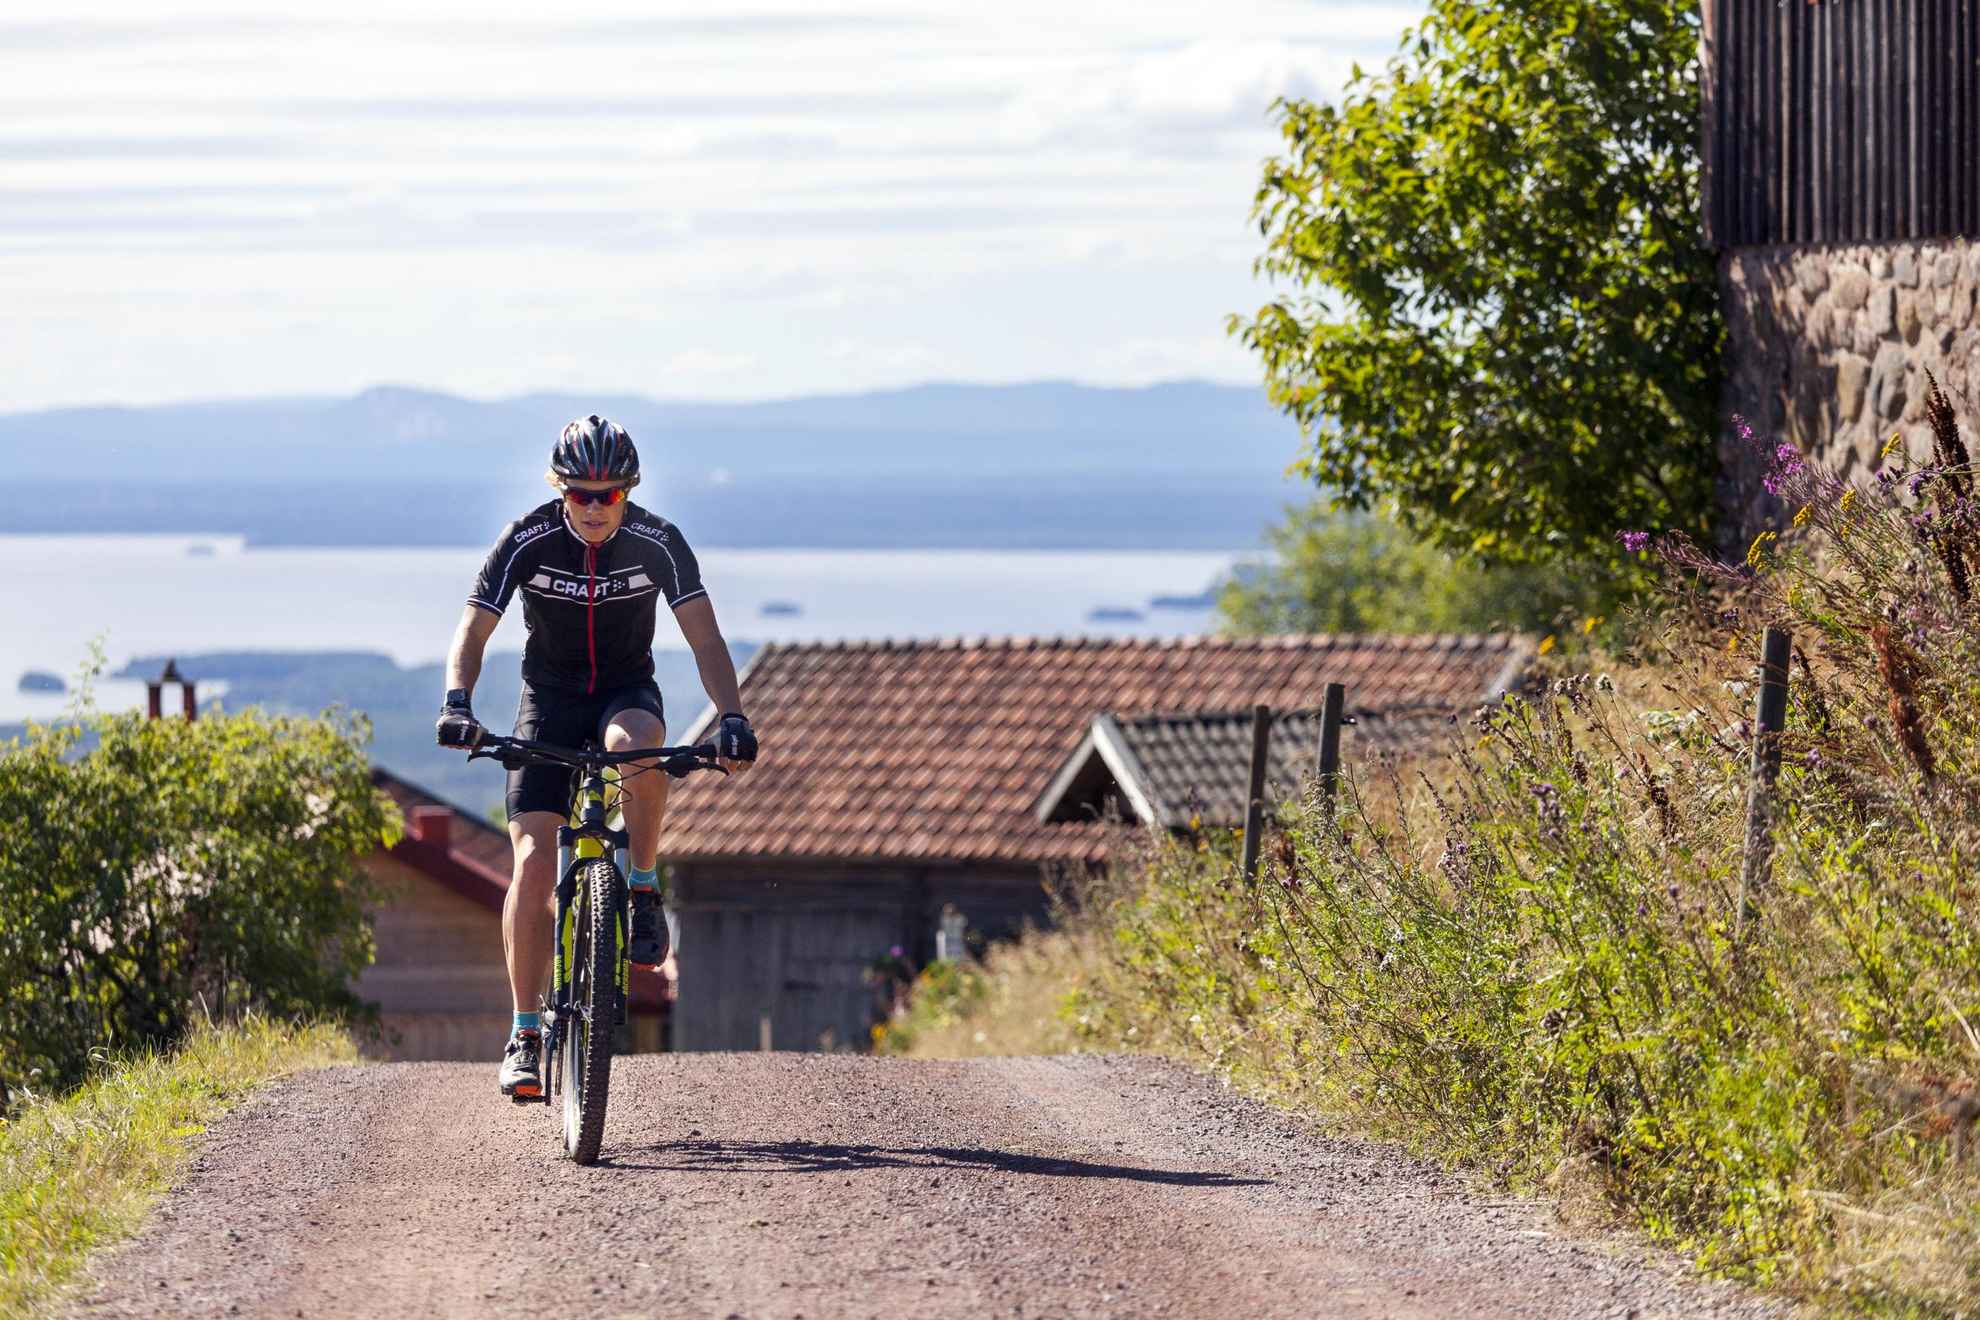 A biker in biking gear going up a hill, with wooden houses, hills and the sea in the background.